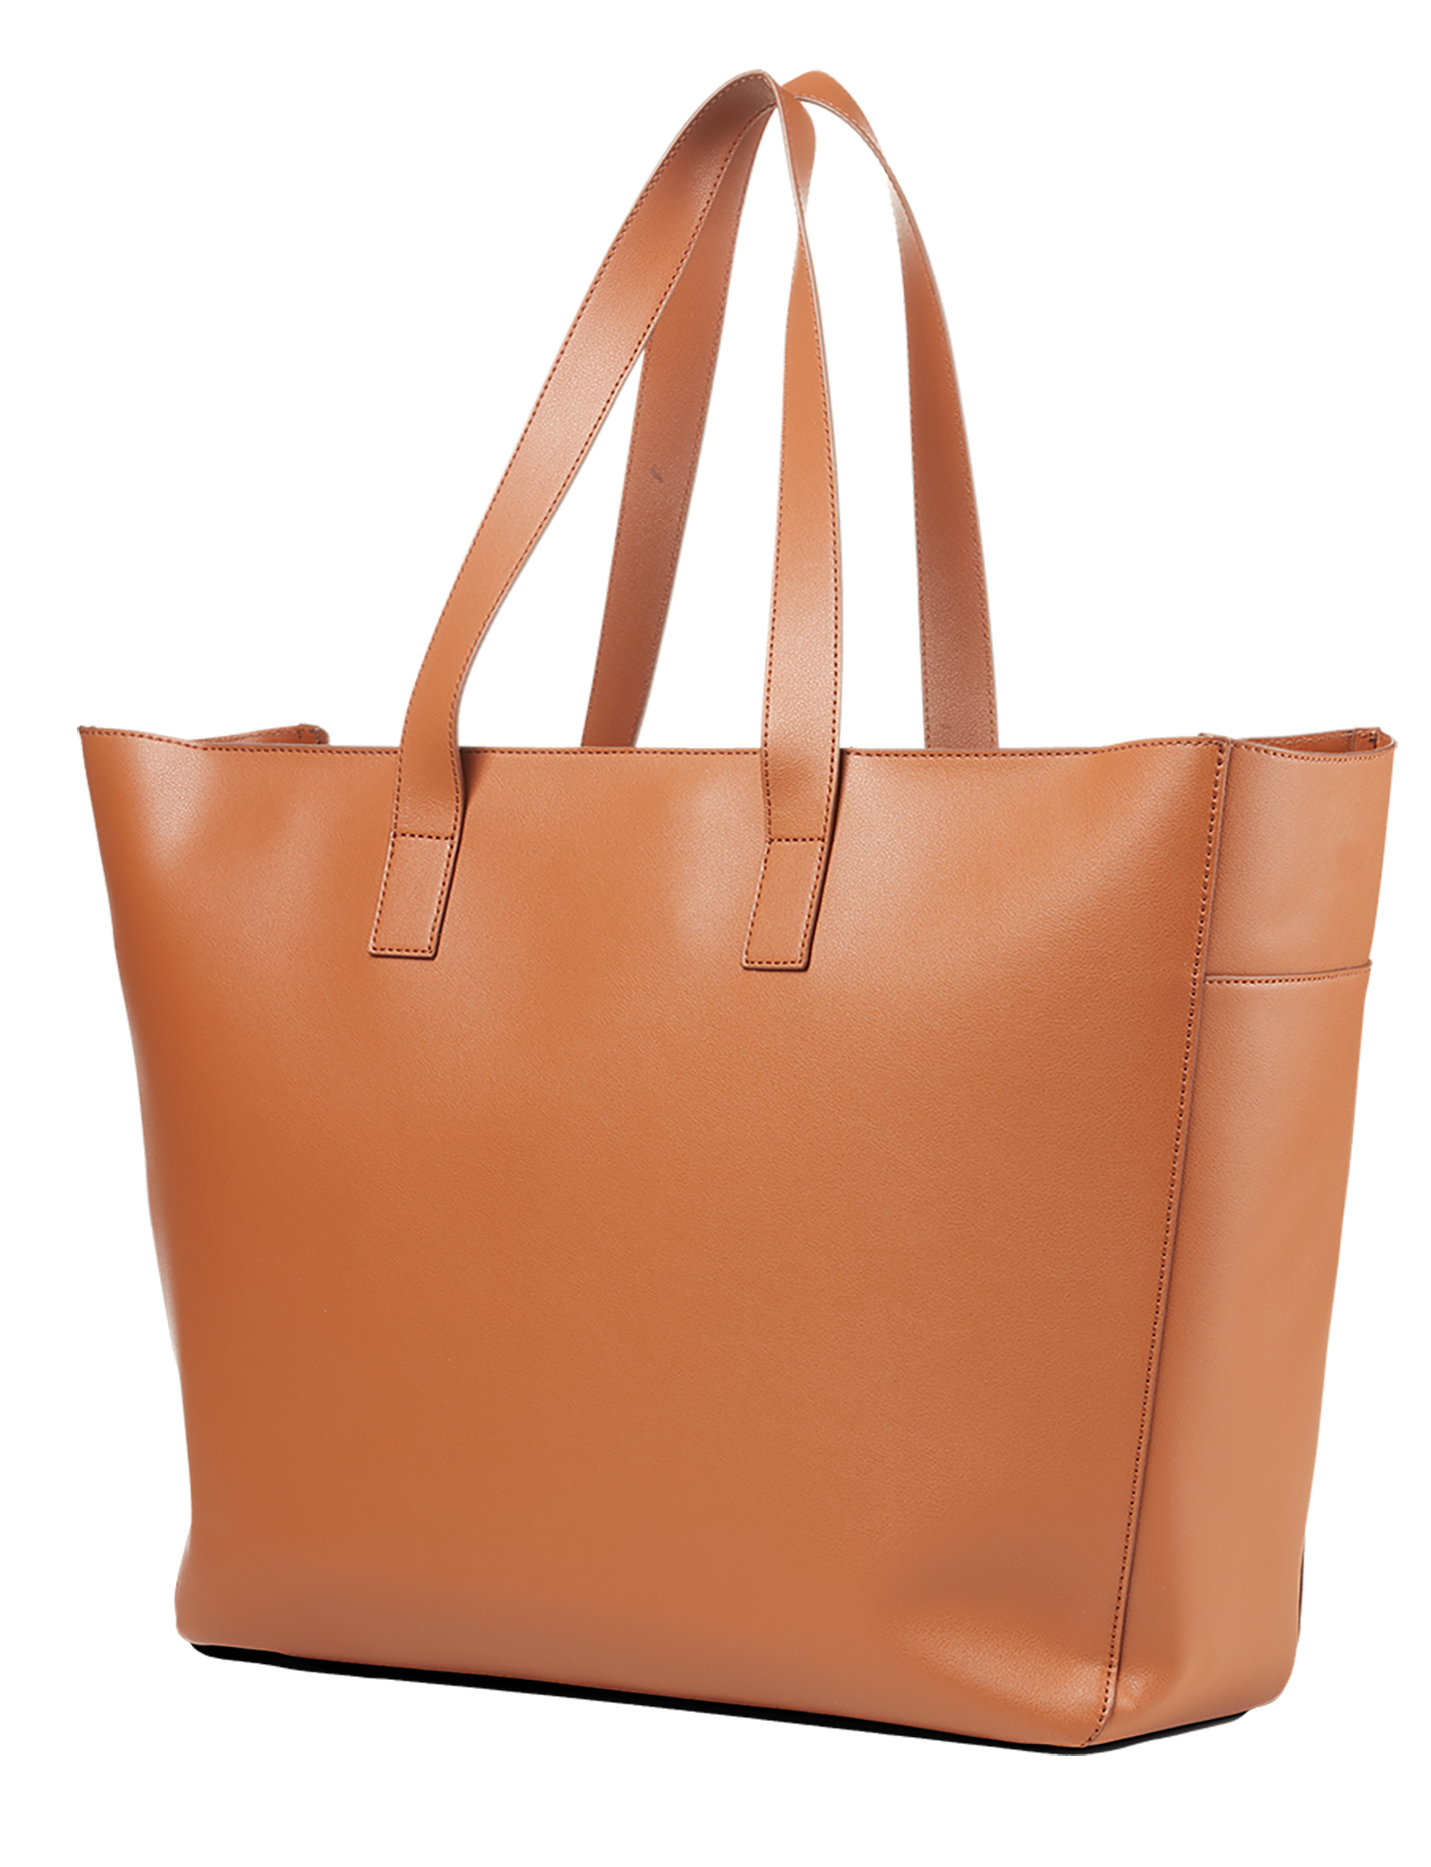 Indiana Tote With Laptop Sleeve